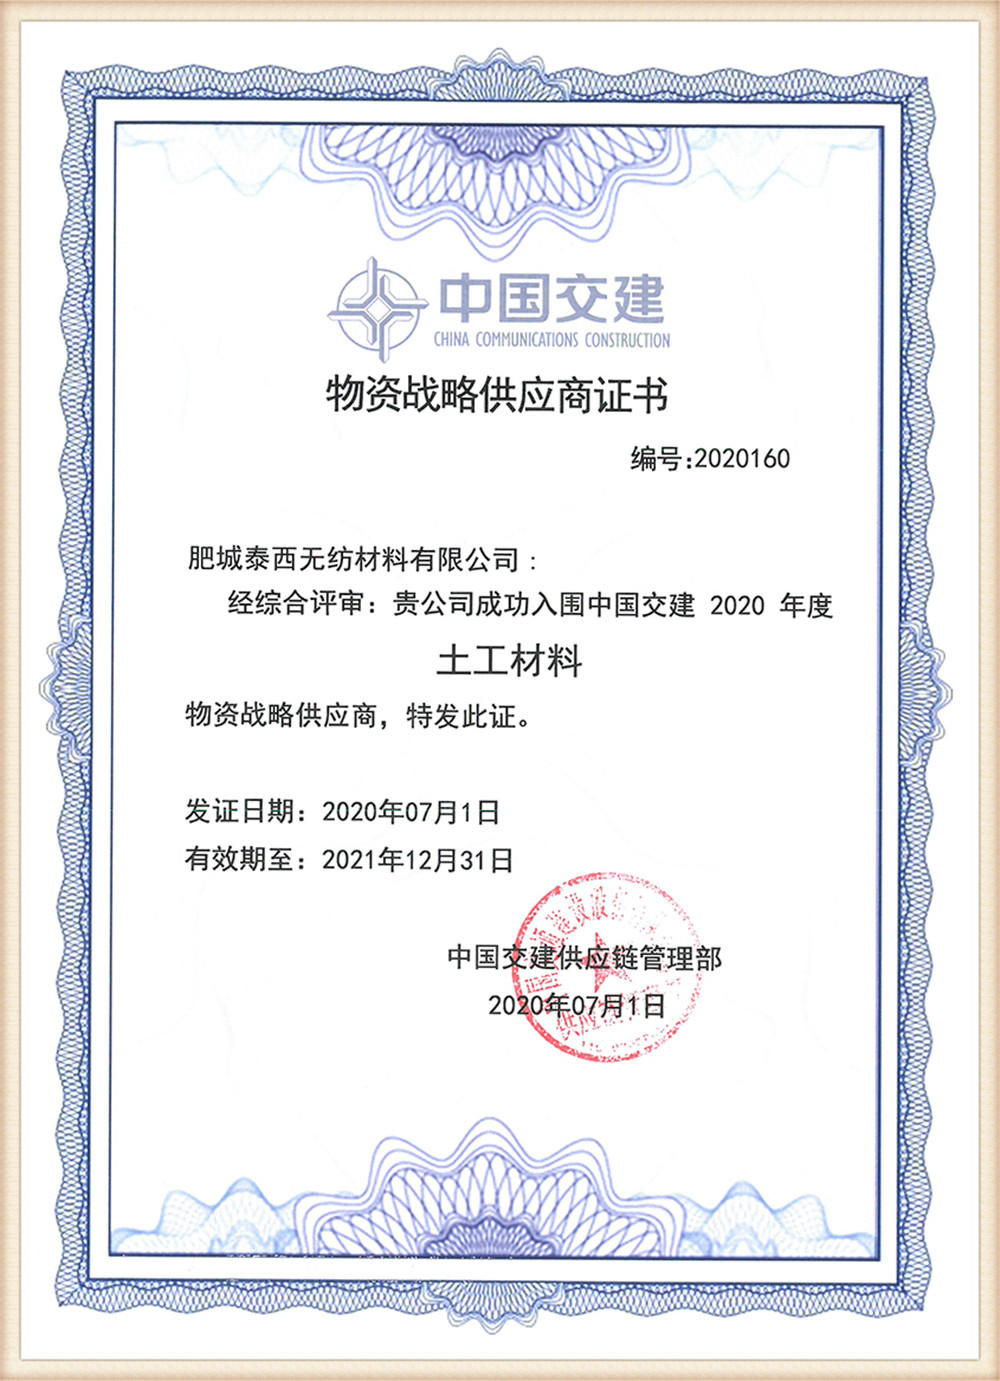 China Communications Construction Materials Strategic Supplier Certificate